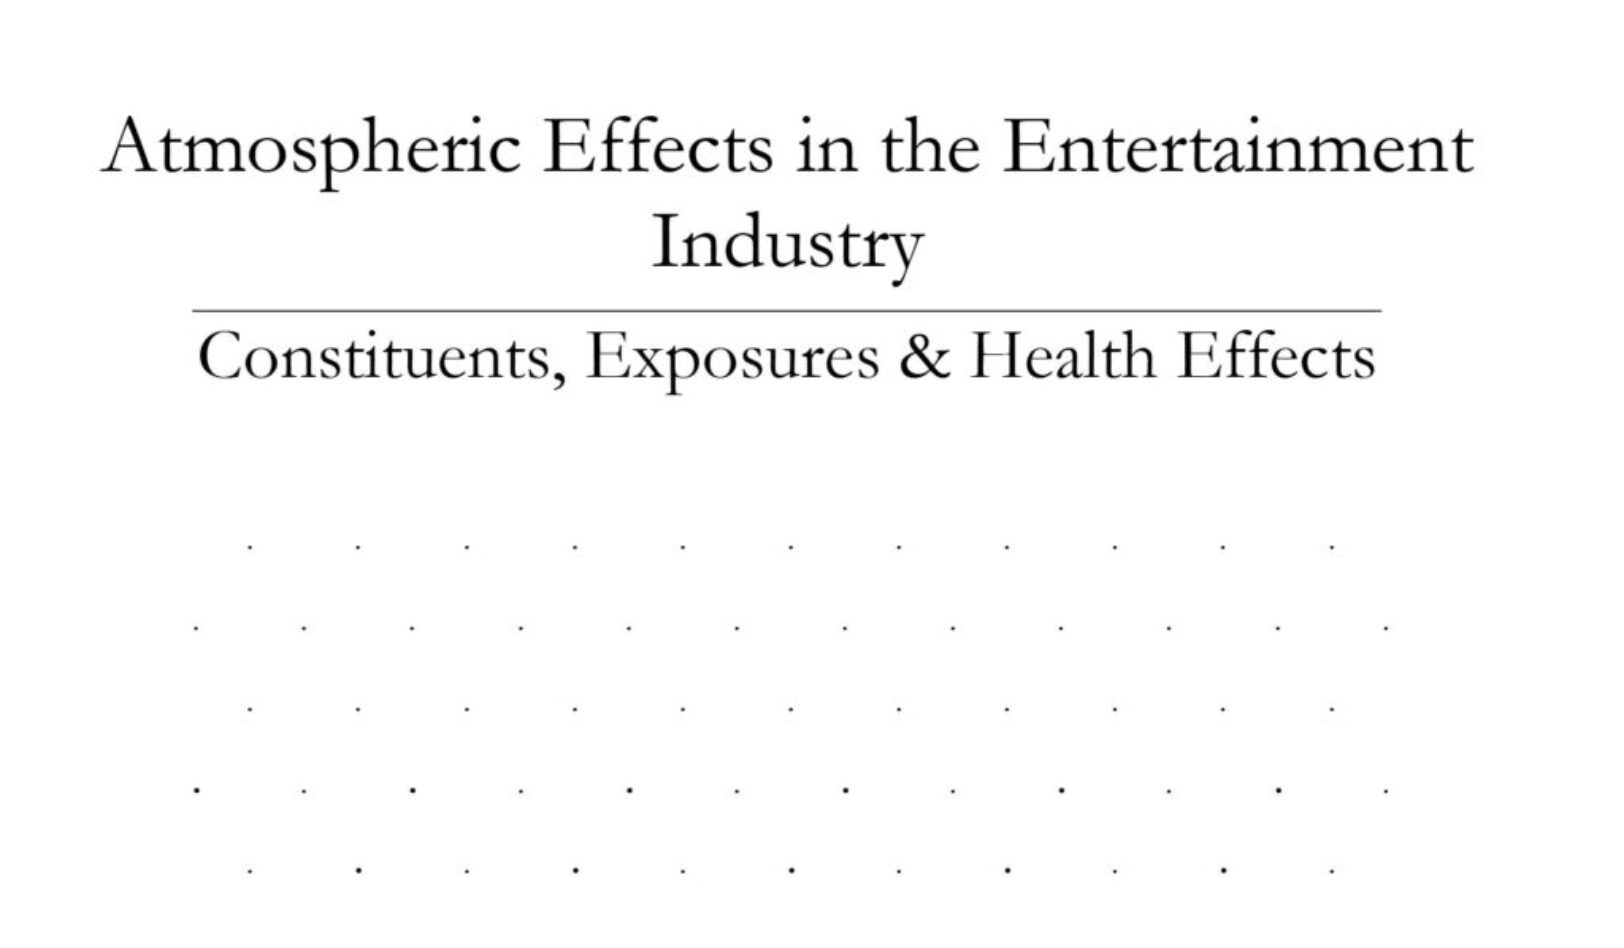 Atmospheric Effects in the Entertainment Industry: Constituents, Exposures and Health Effects